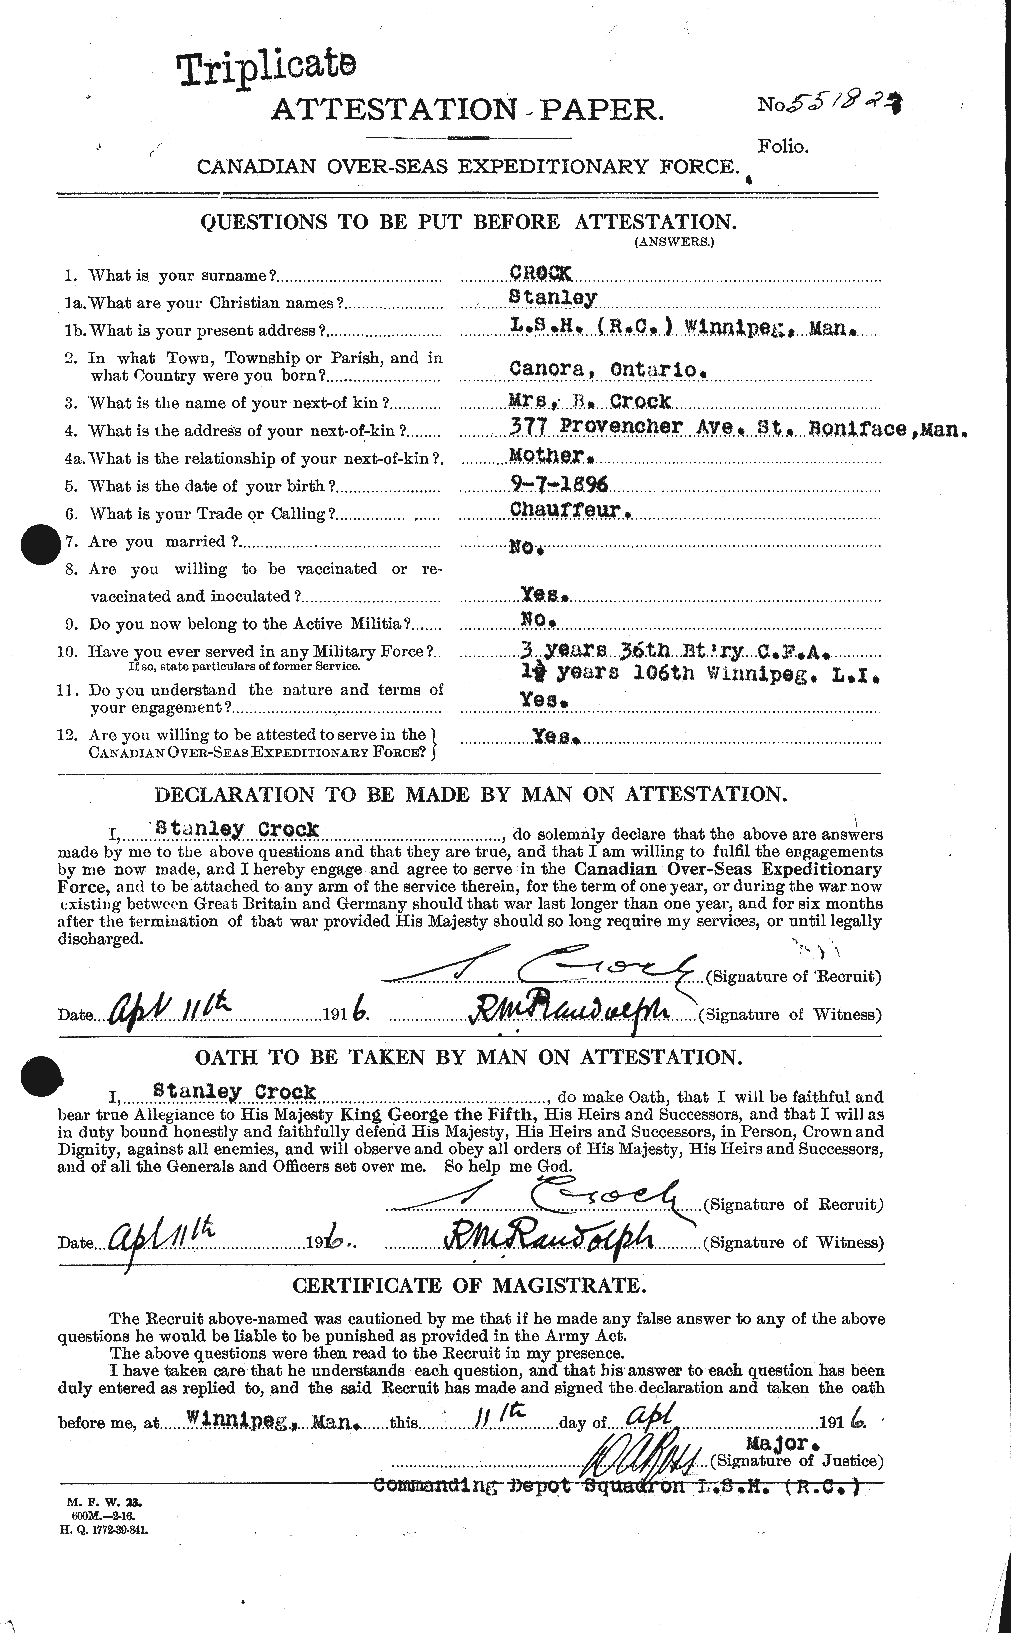 Personnel Records of the First World War - CEF 064976a